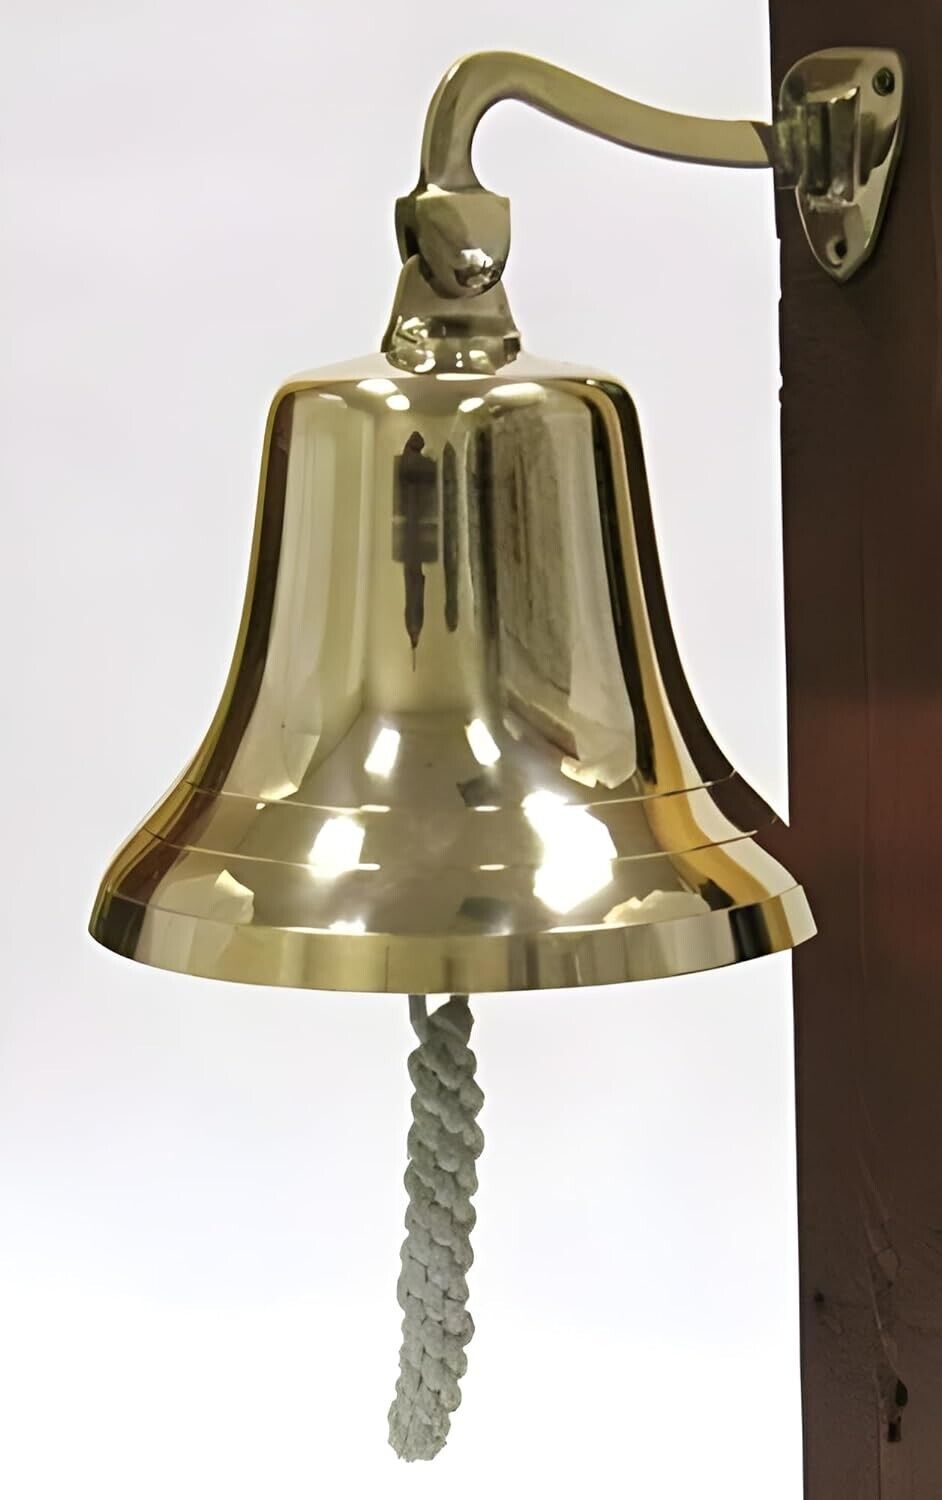 Nagina International Enormous Wall Hanging Ship Dinner Tip Bell w/ Rope Polished